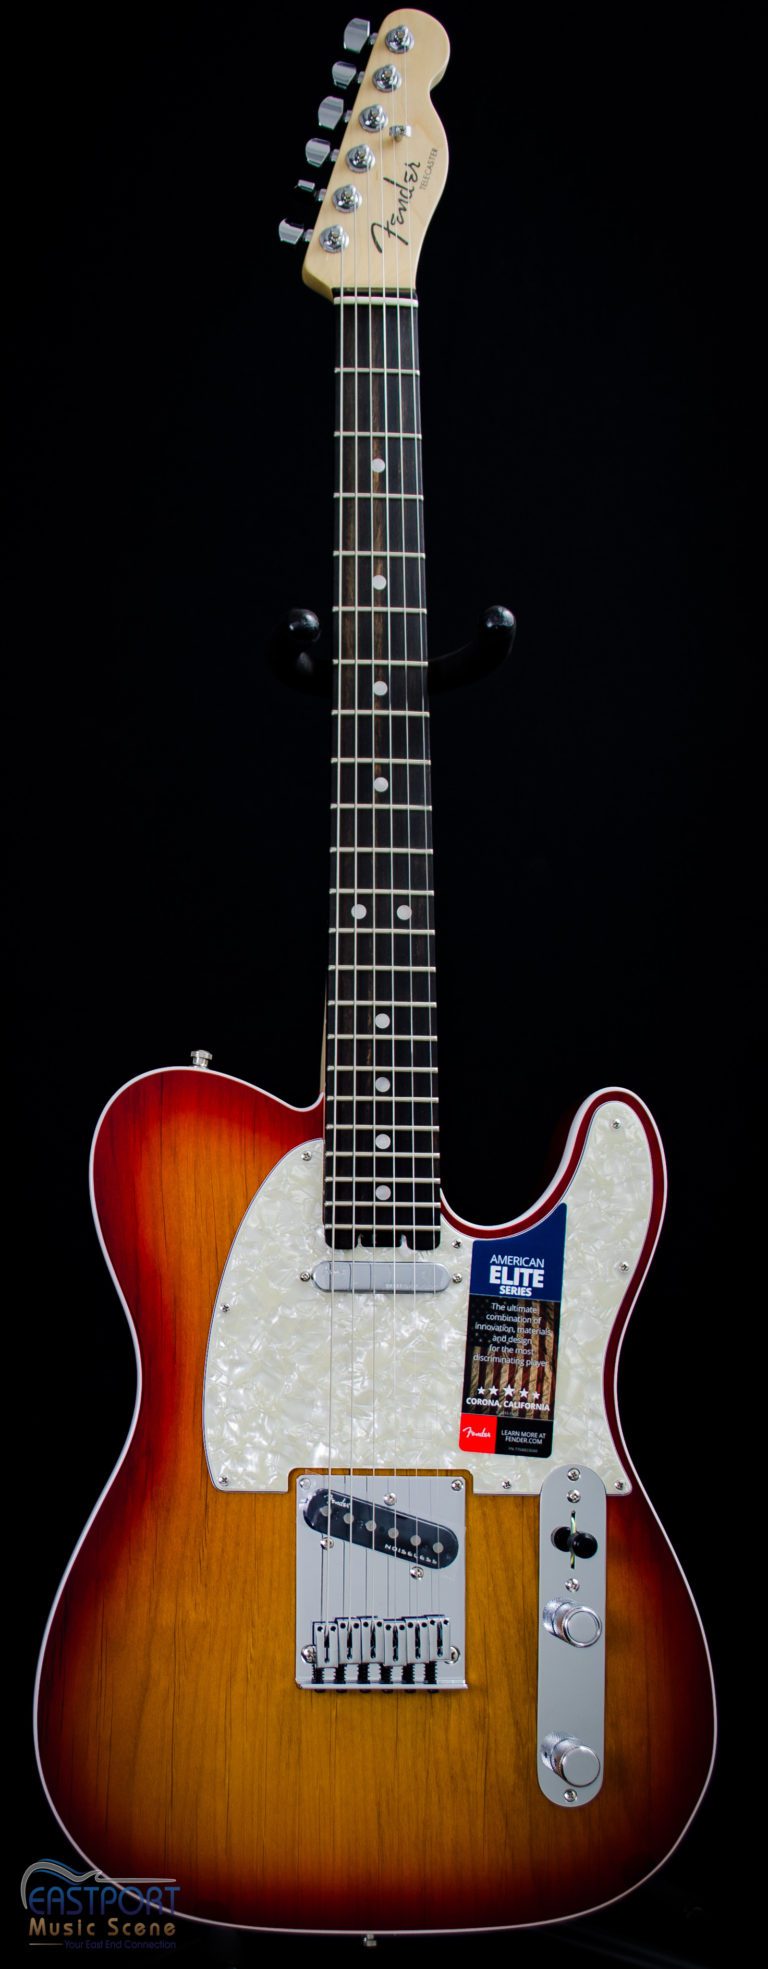 A guitar with the strings missing is shown.